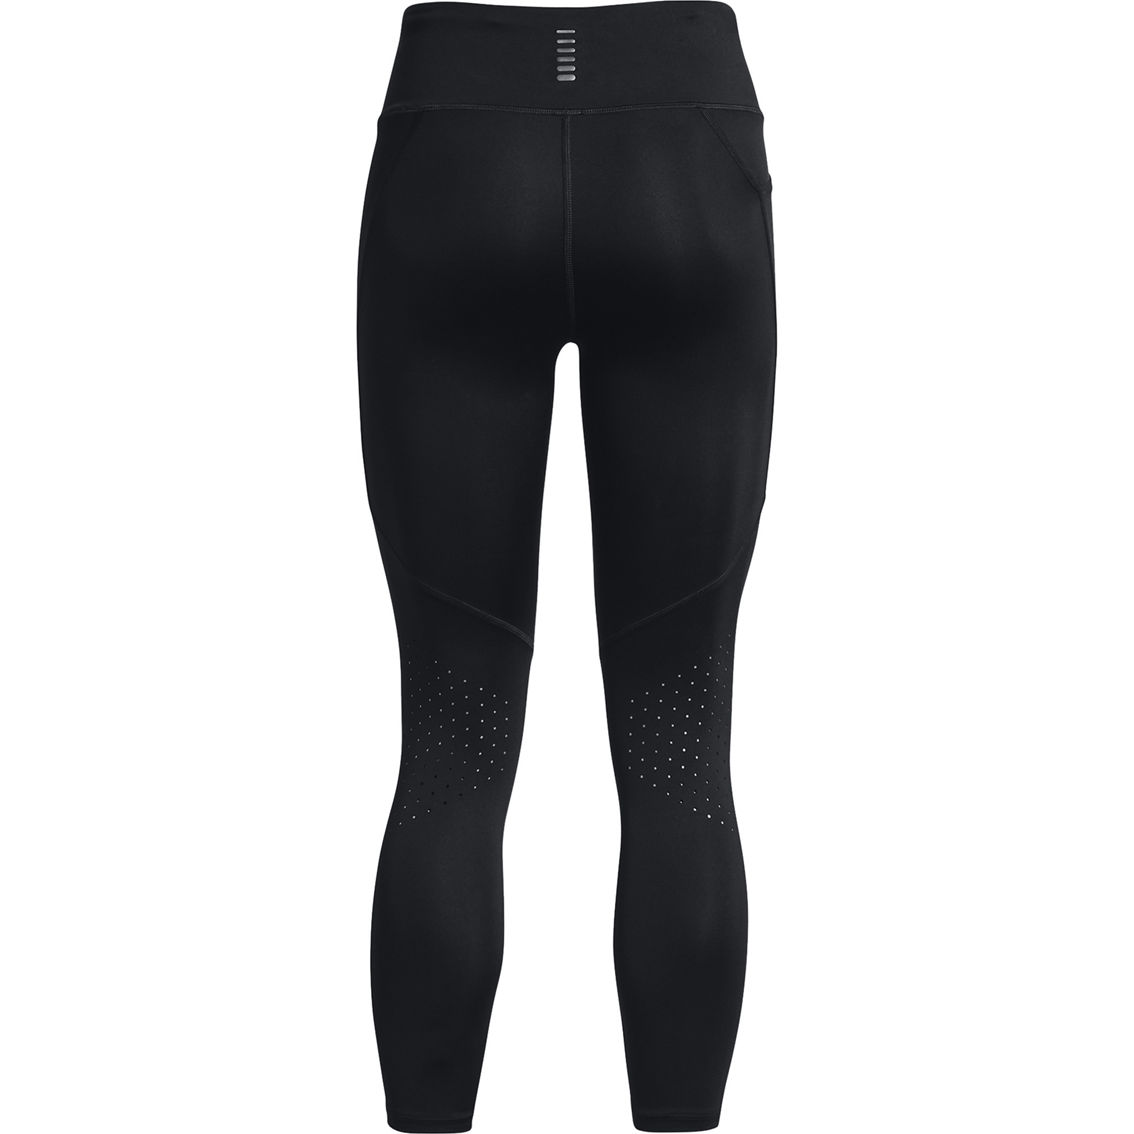 Under Armour Launch Ankle Tights - Image 8 of 8